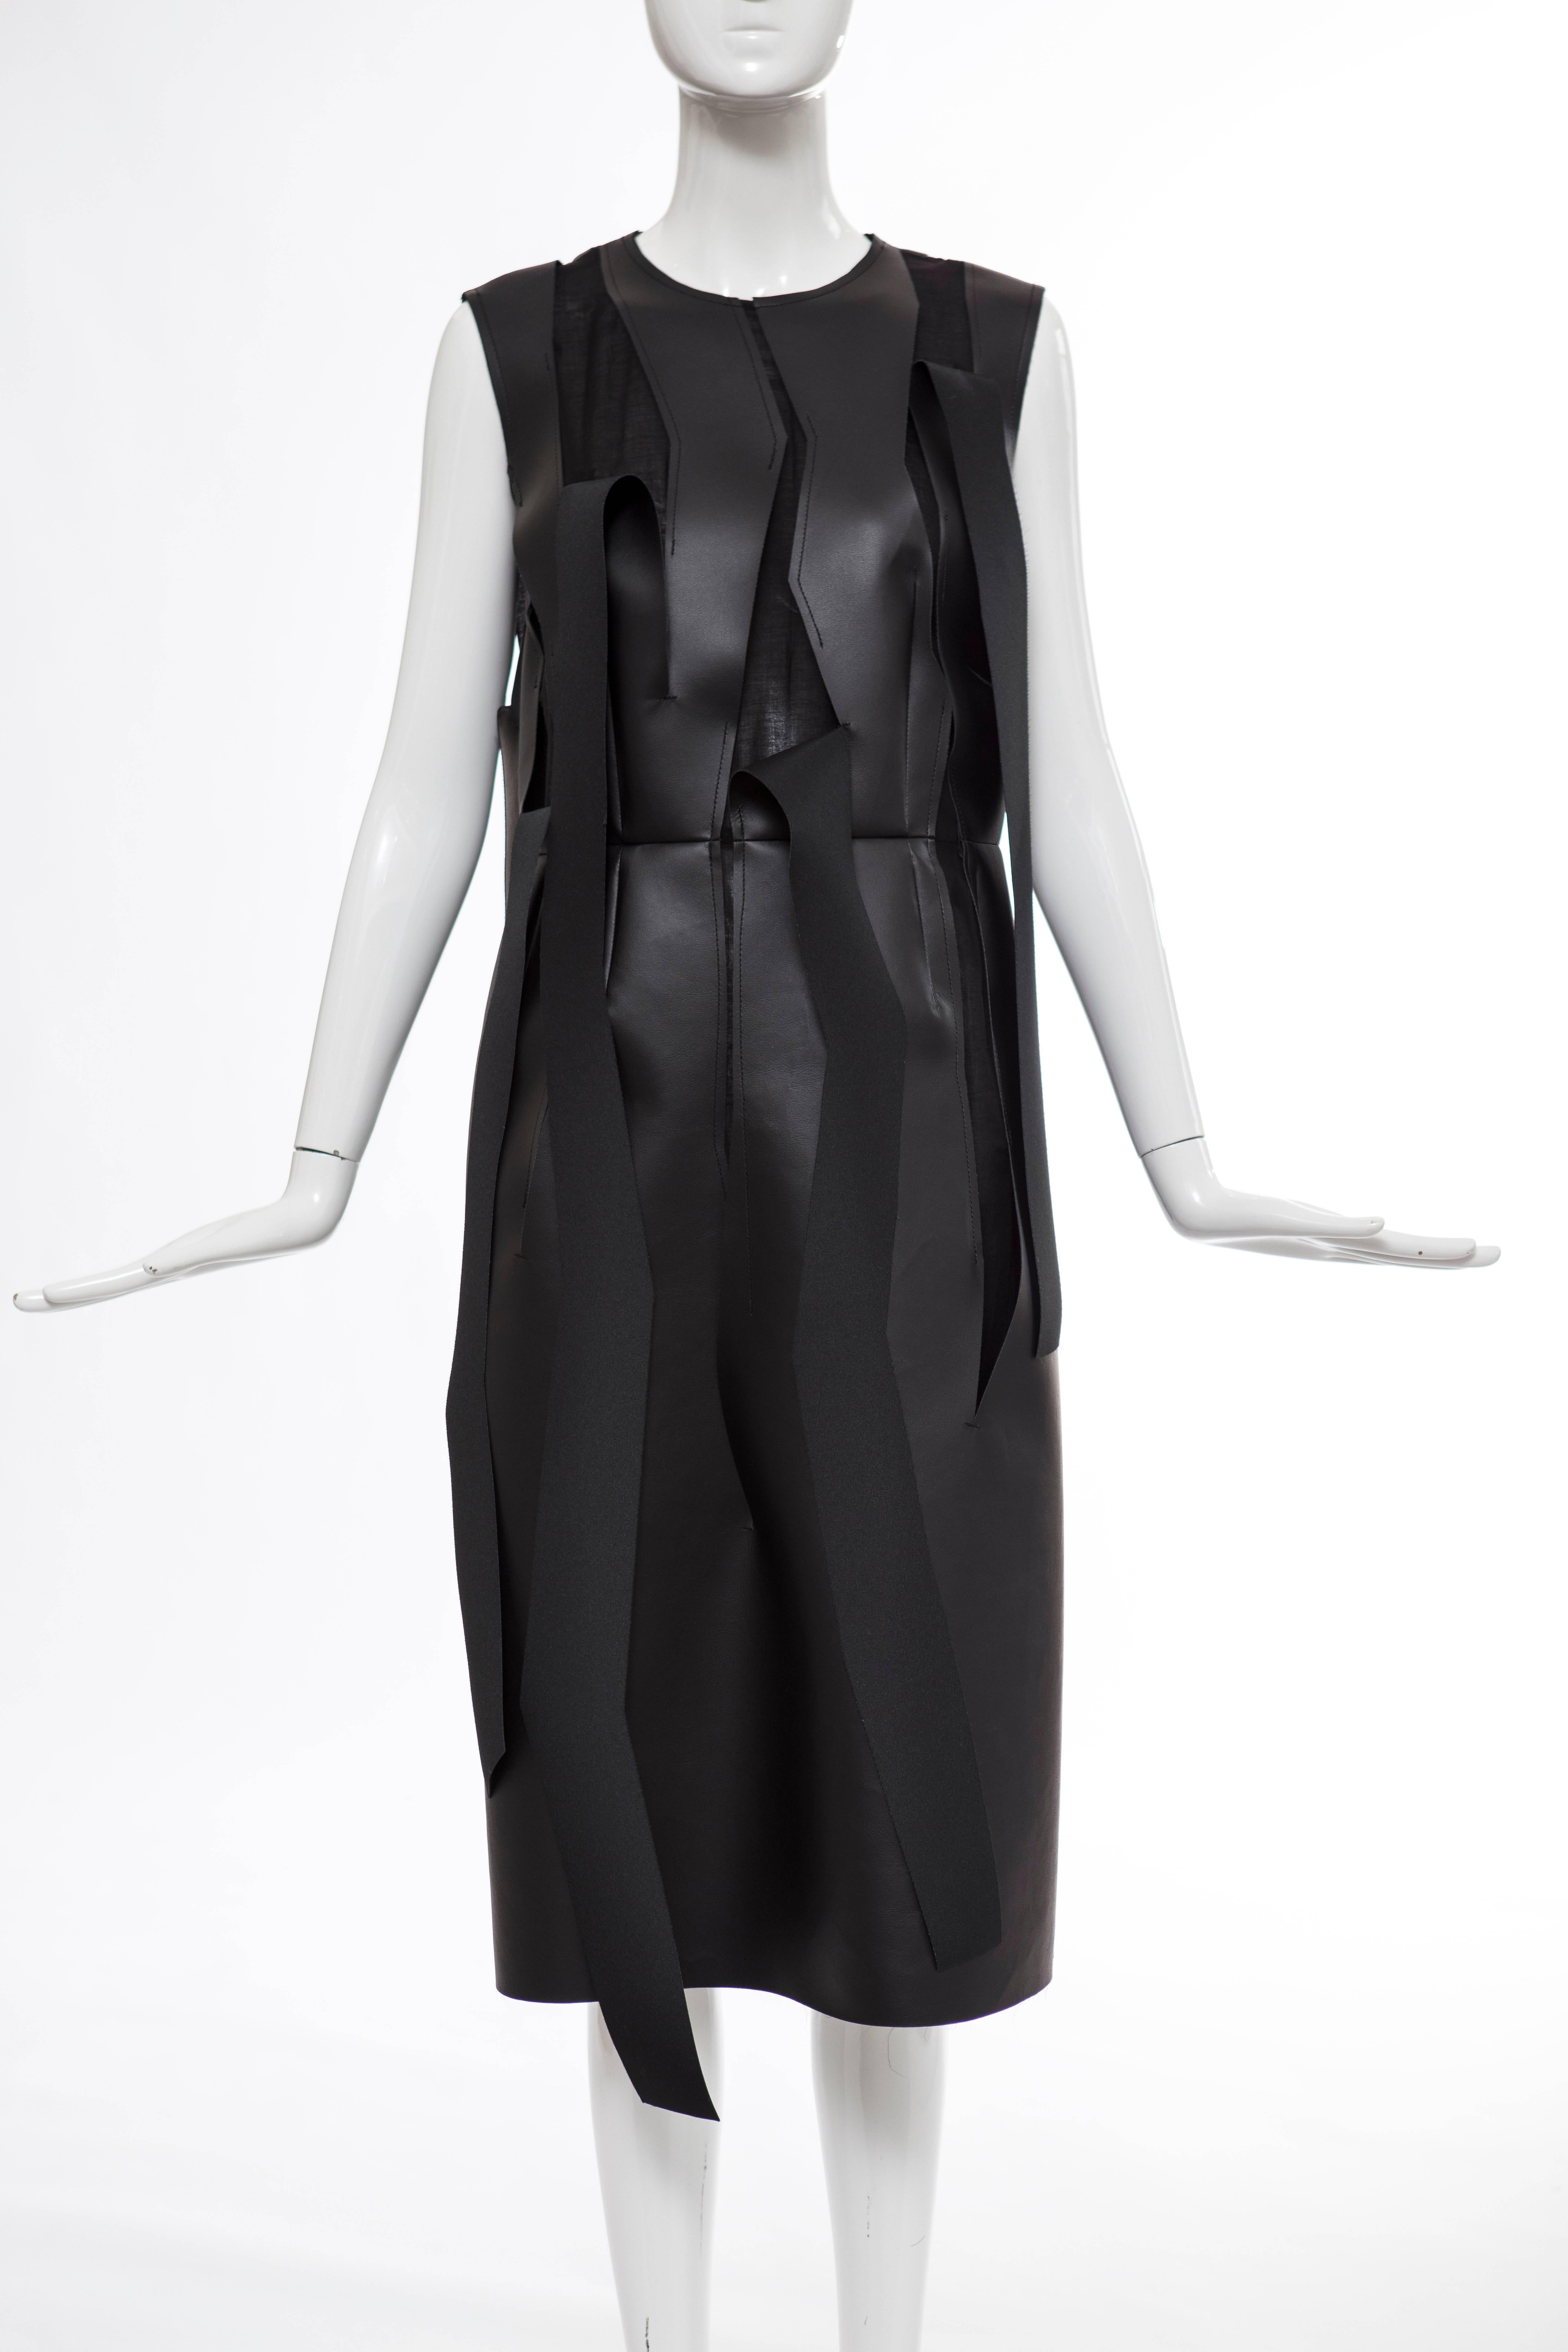  Comme des Garçons, circa 2014, faux leather sleeveless, sheath dress with cutout strips throughout, round neckline, back zip closure and fully lined.

Japan: Medium

Bust 37”, Waist 33”, Hip 40”, Length 45”

Fabric Content: 100% Synthetic Leather;